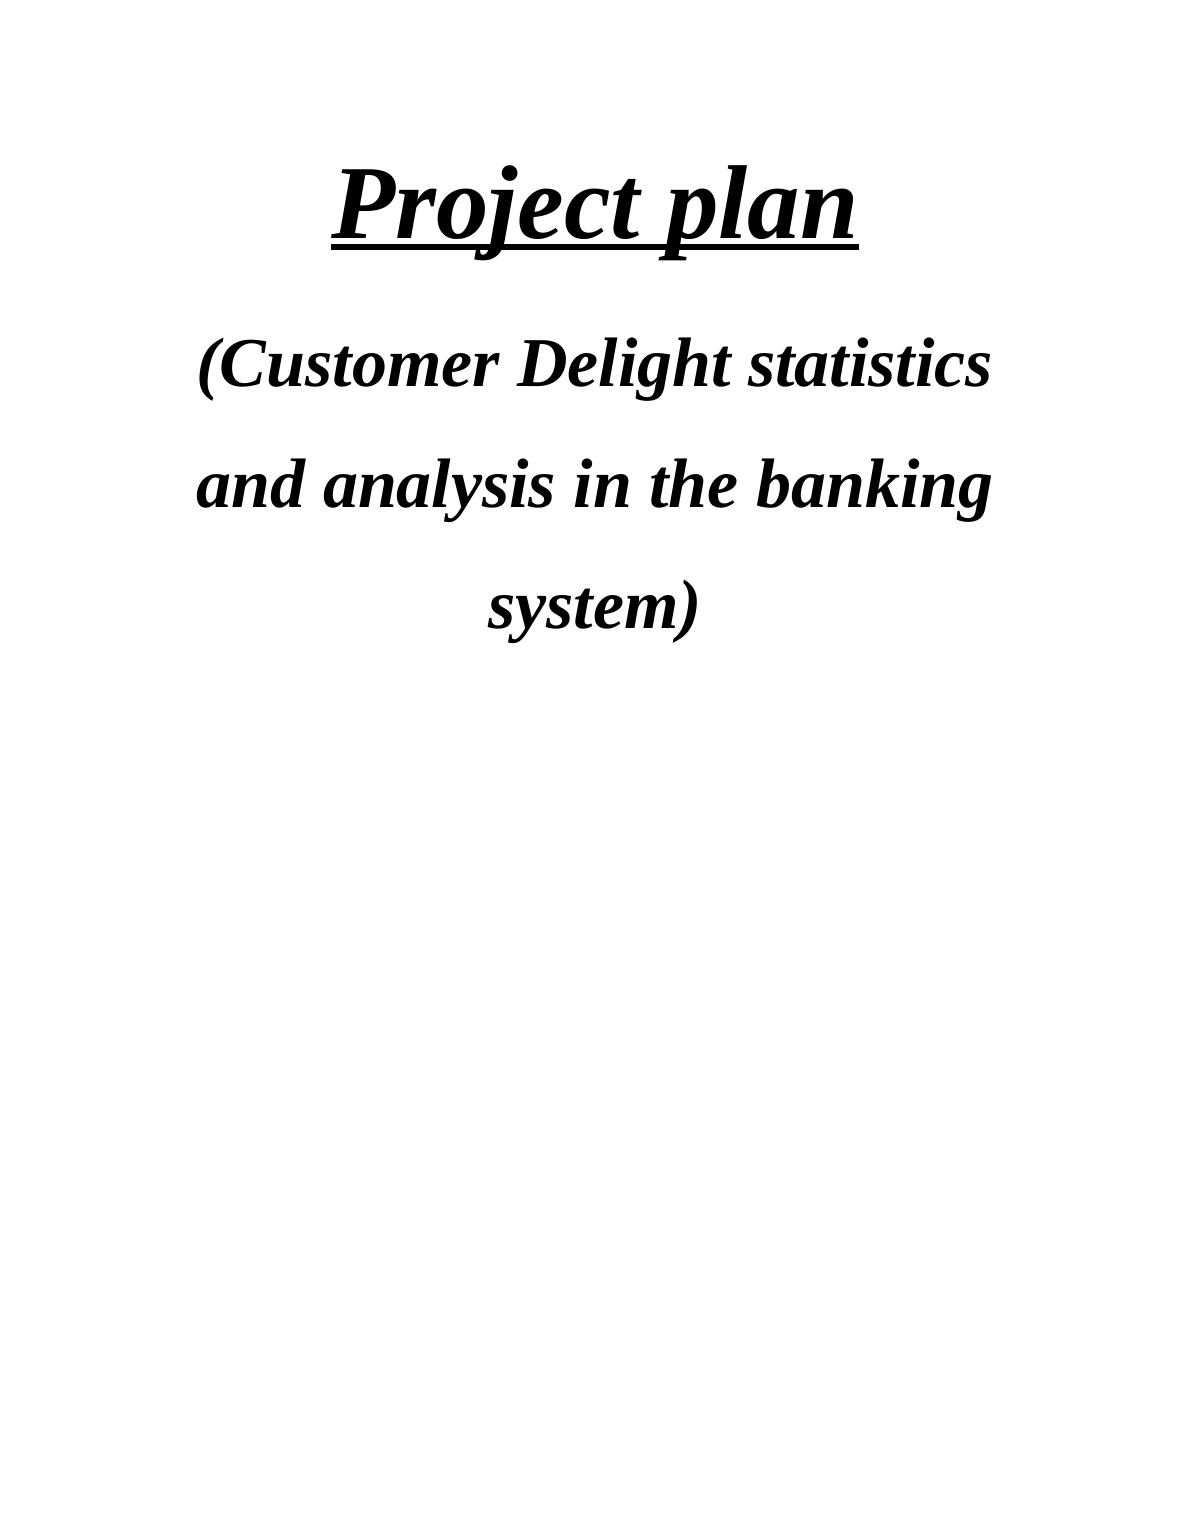 Customer Delight Statistics and Analysis in the Banking System_1